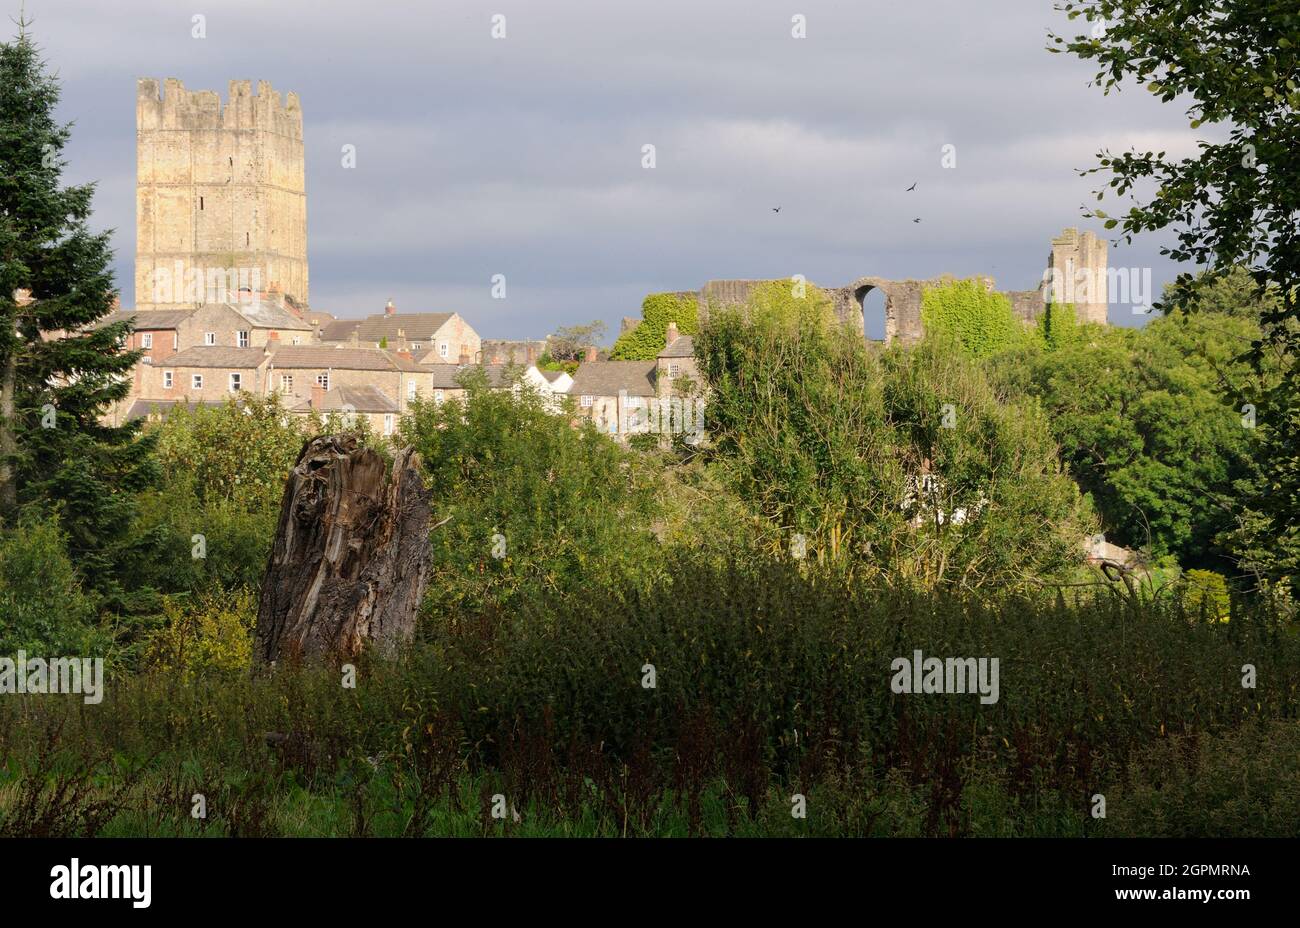 View of Richmond Castle from the west, in Richmond, Yorksjire, England Stock Photo